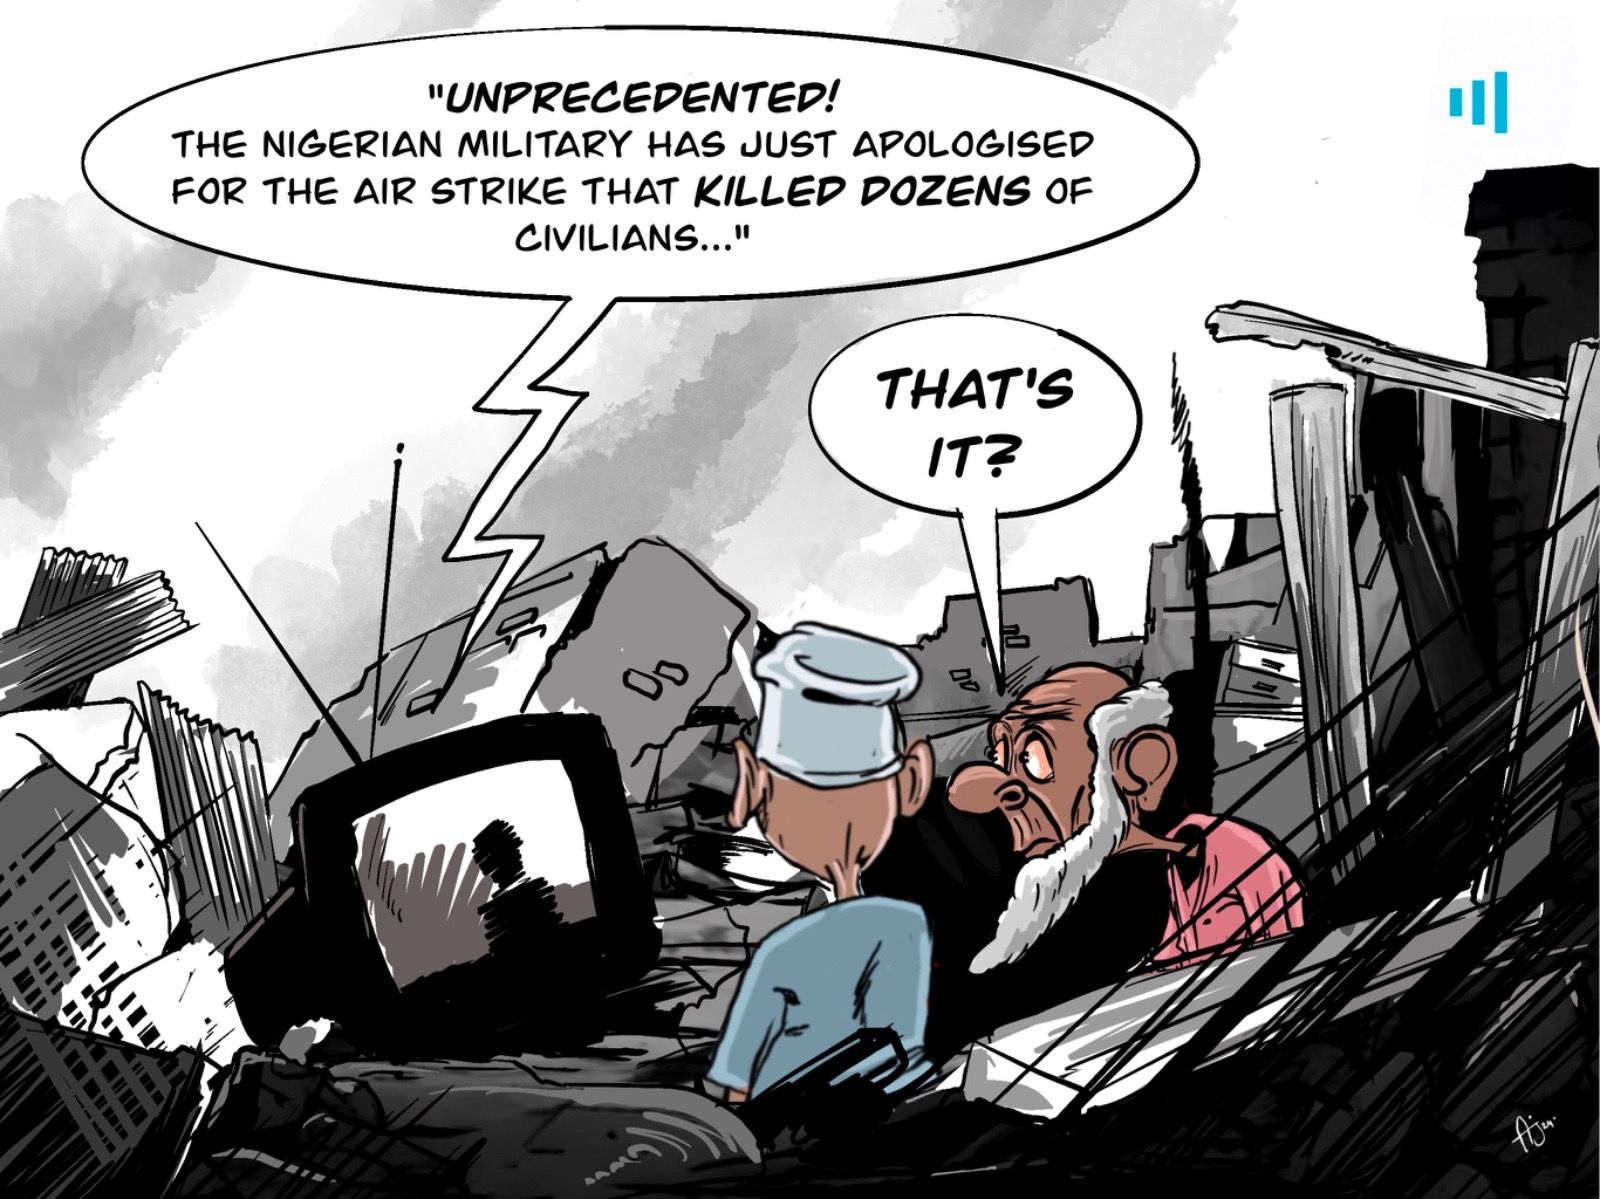 Cartoon of two men amid rubble watching news of a Nigerian military apology for a deadly air strike, one man responds skeptically.